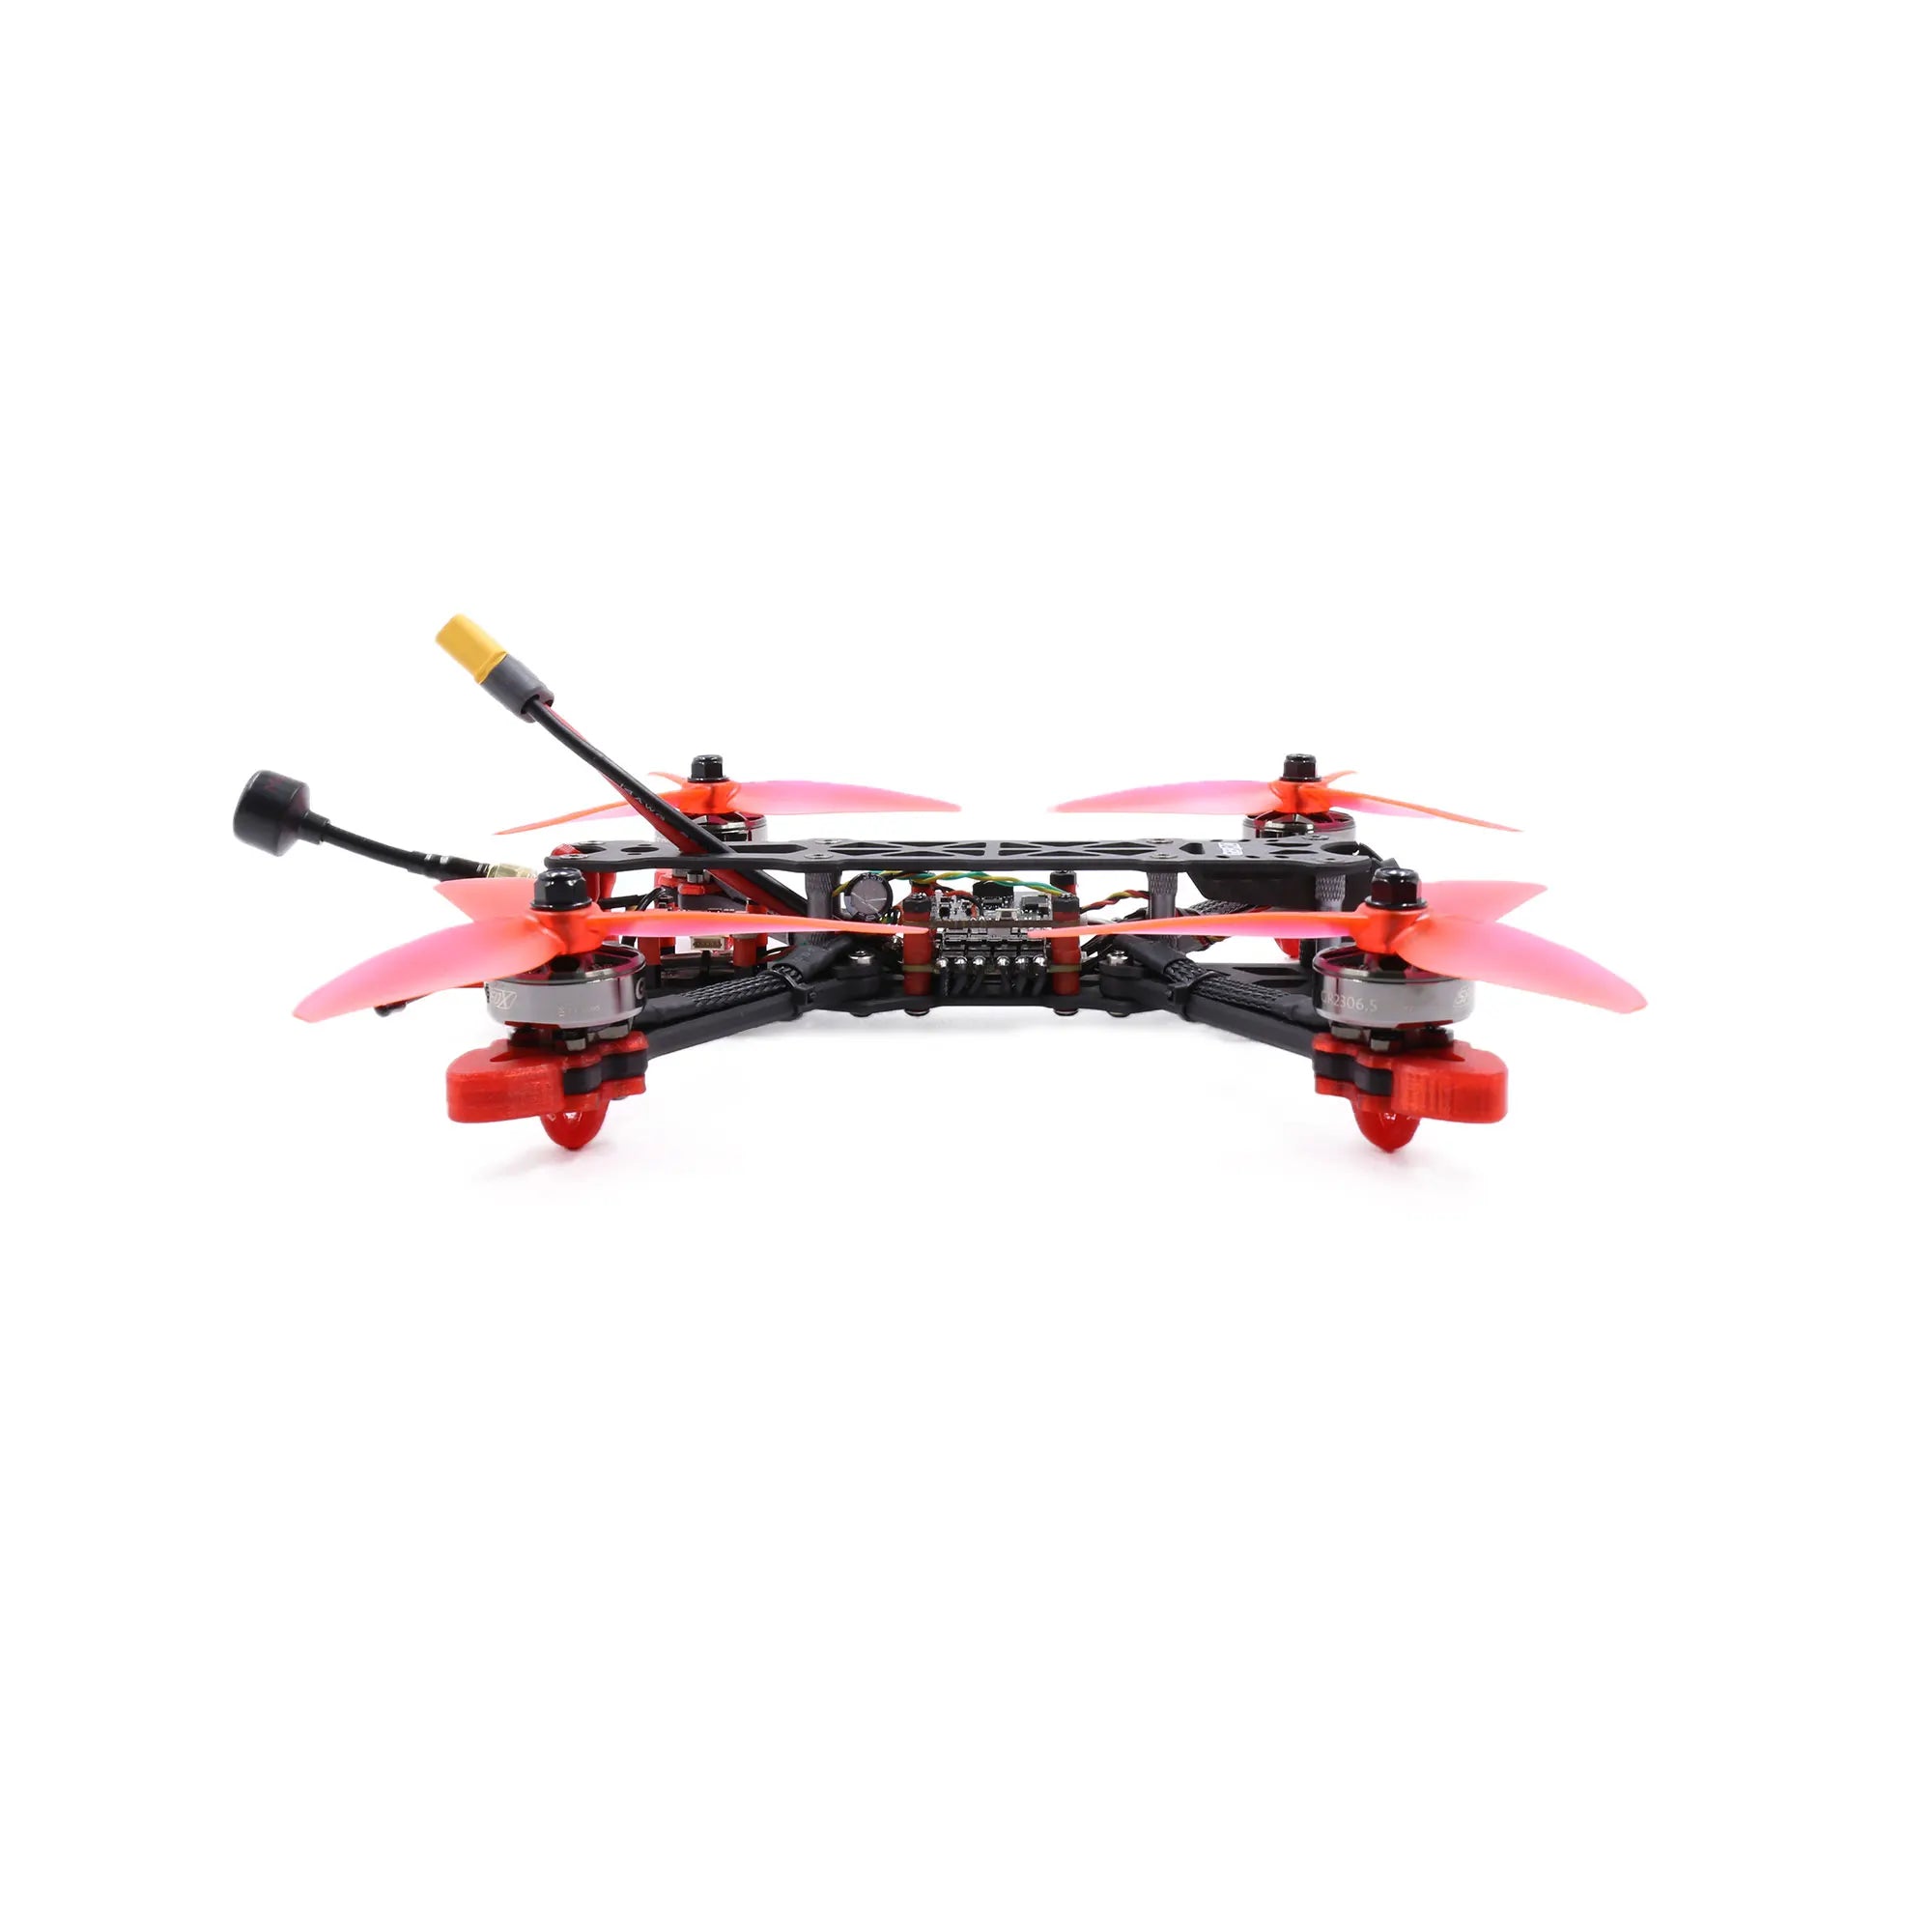 GEPRC MARK4 FPV Drone, GEPRC Momoda 5.8g antenna performs to the highest standard and refined radiation